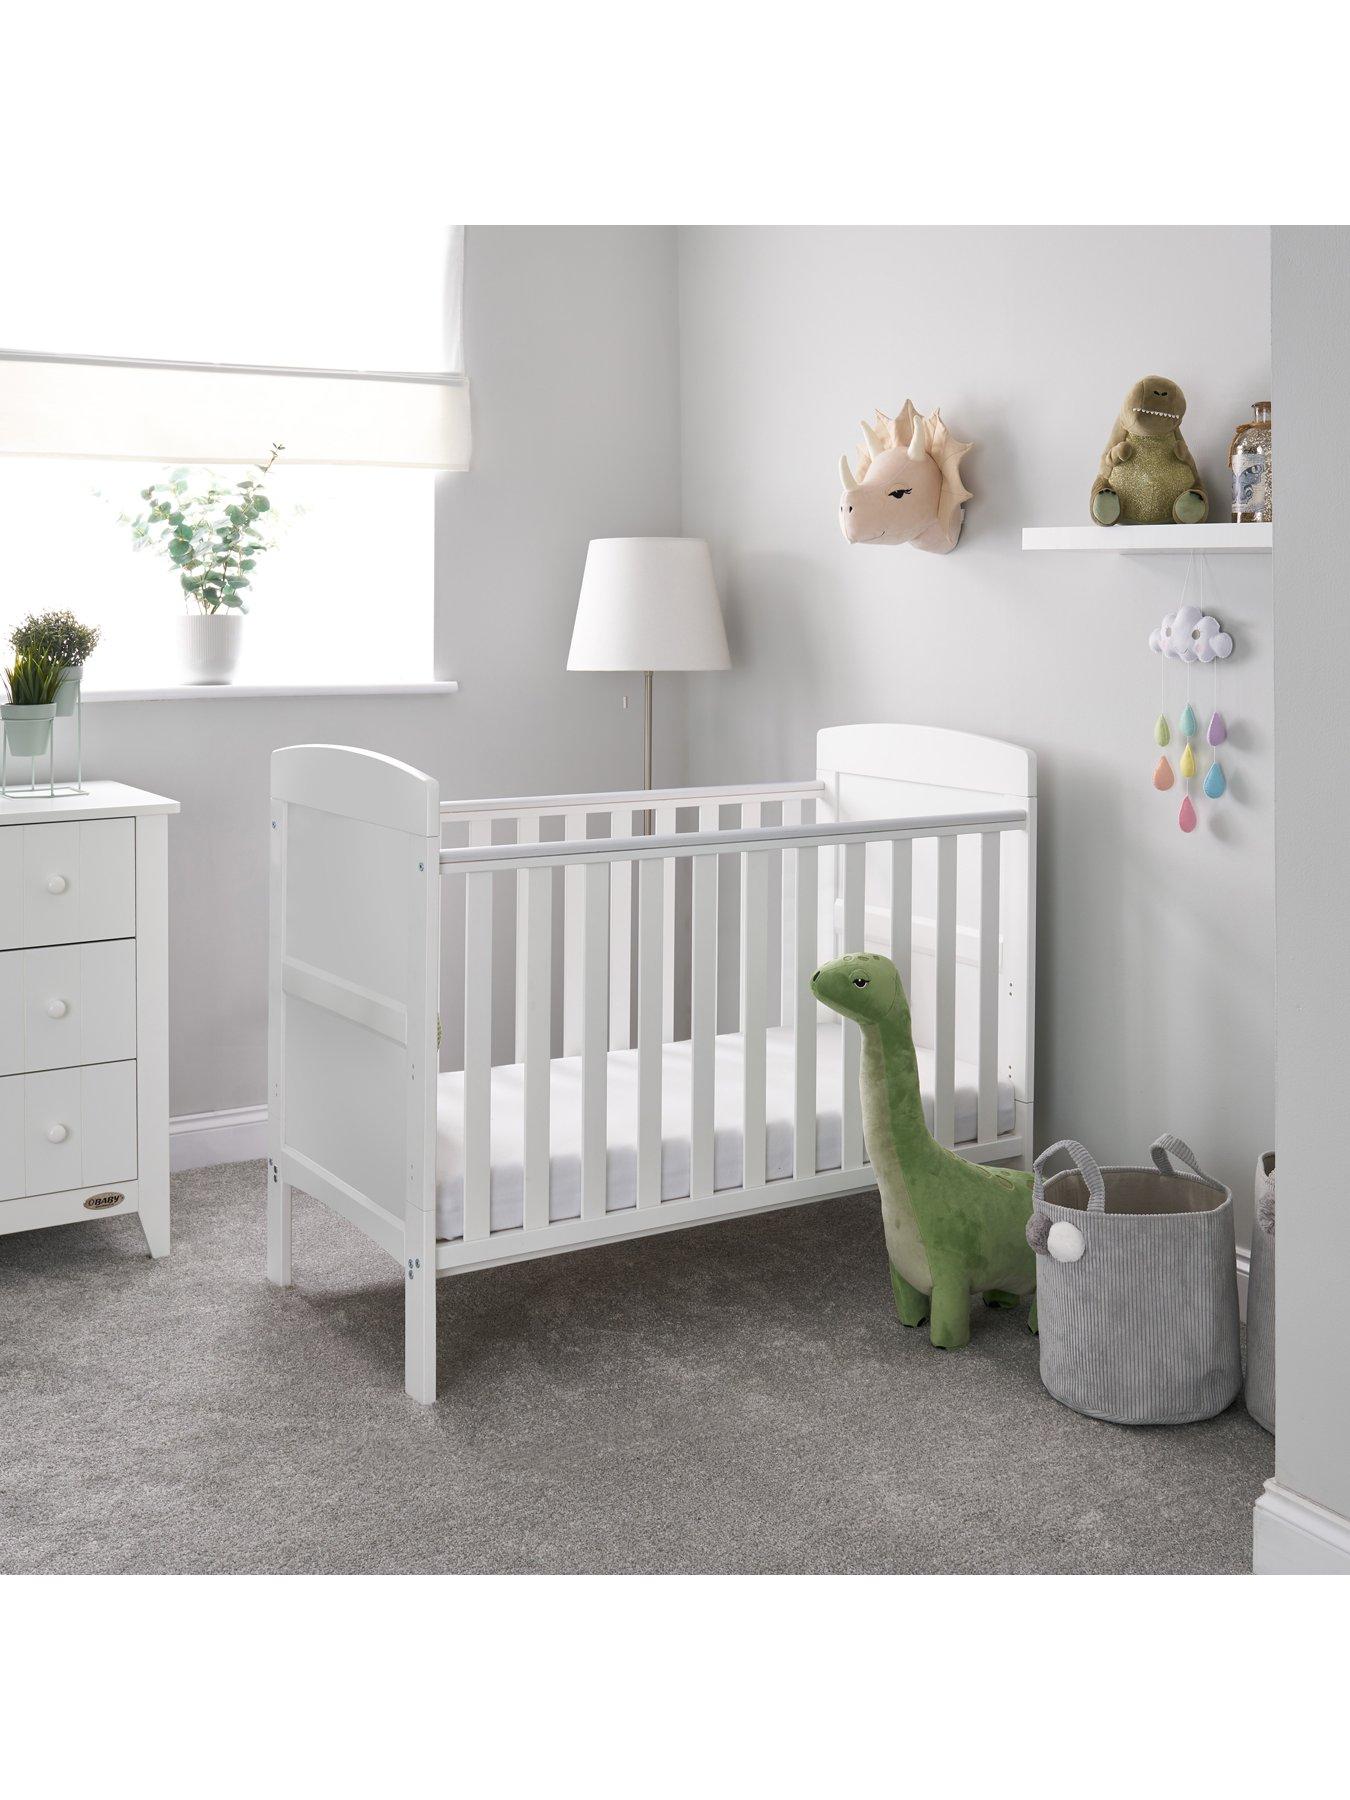 | furniture cot & & Obaby | | Nursery baby | Child Cots Ireland beds Very